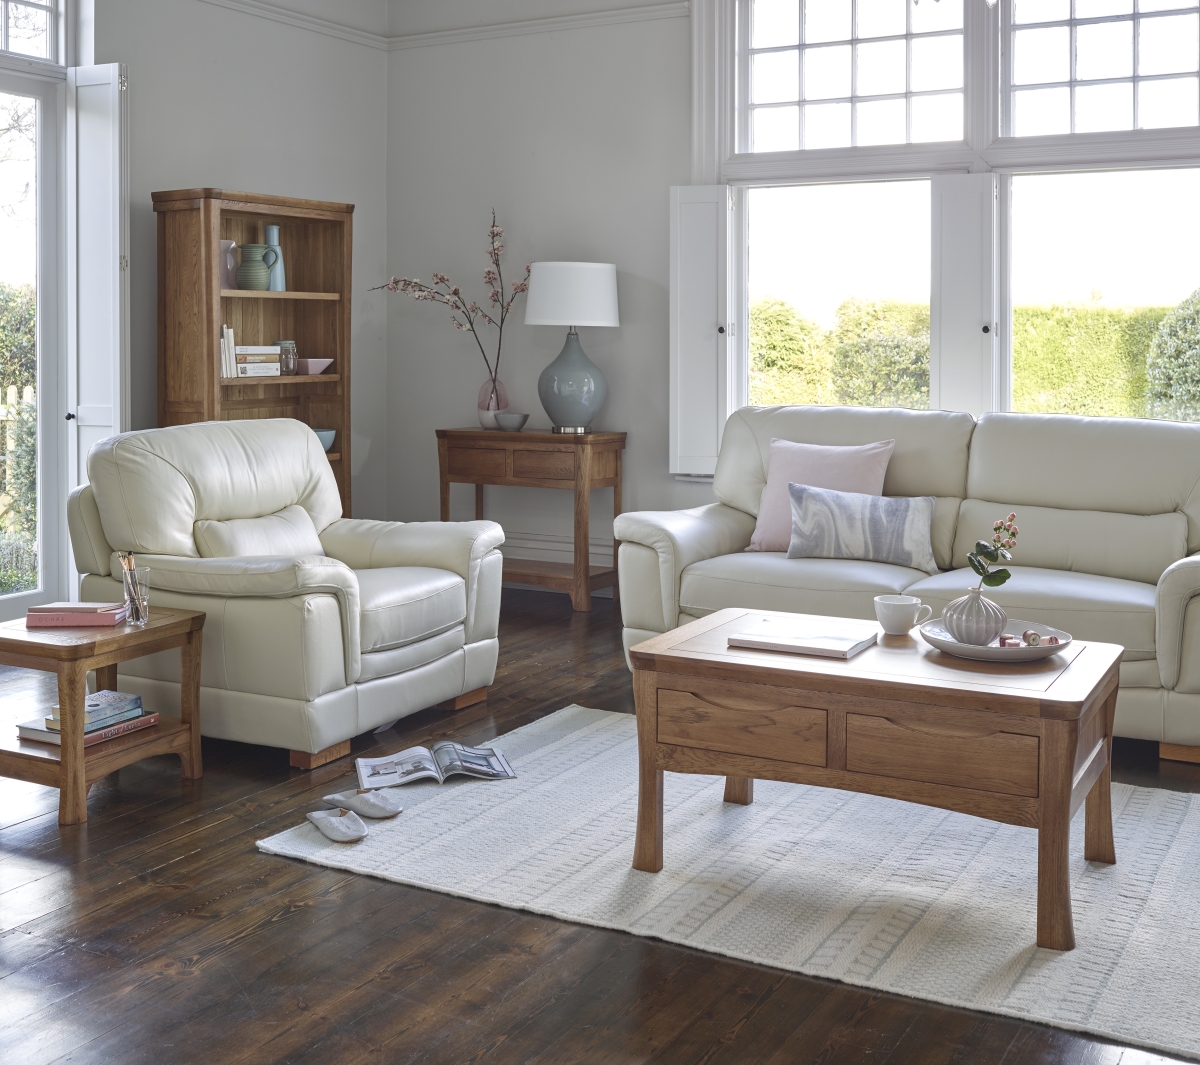 Choosing The Right Living Room Furniture For Your Style | Oak Furniture ...